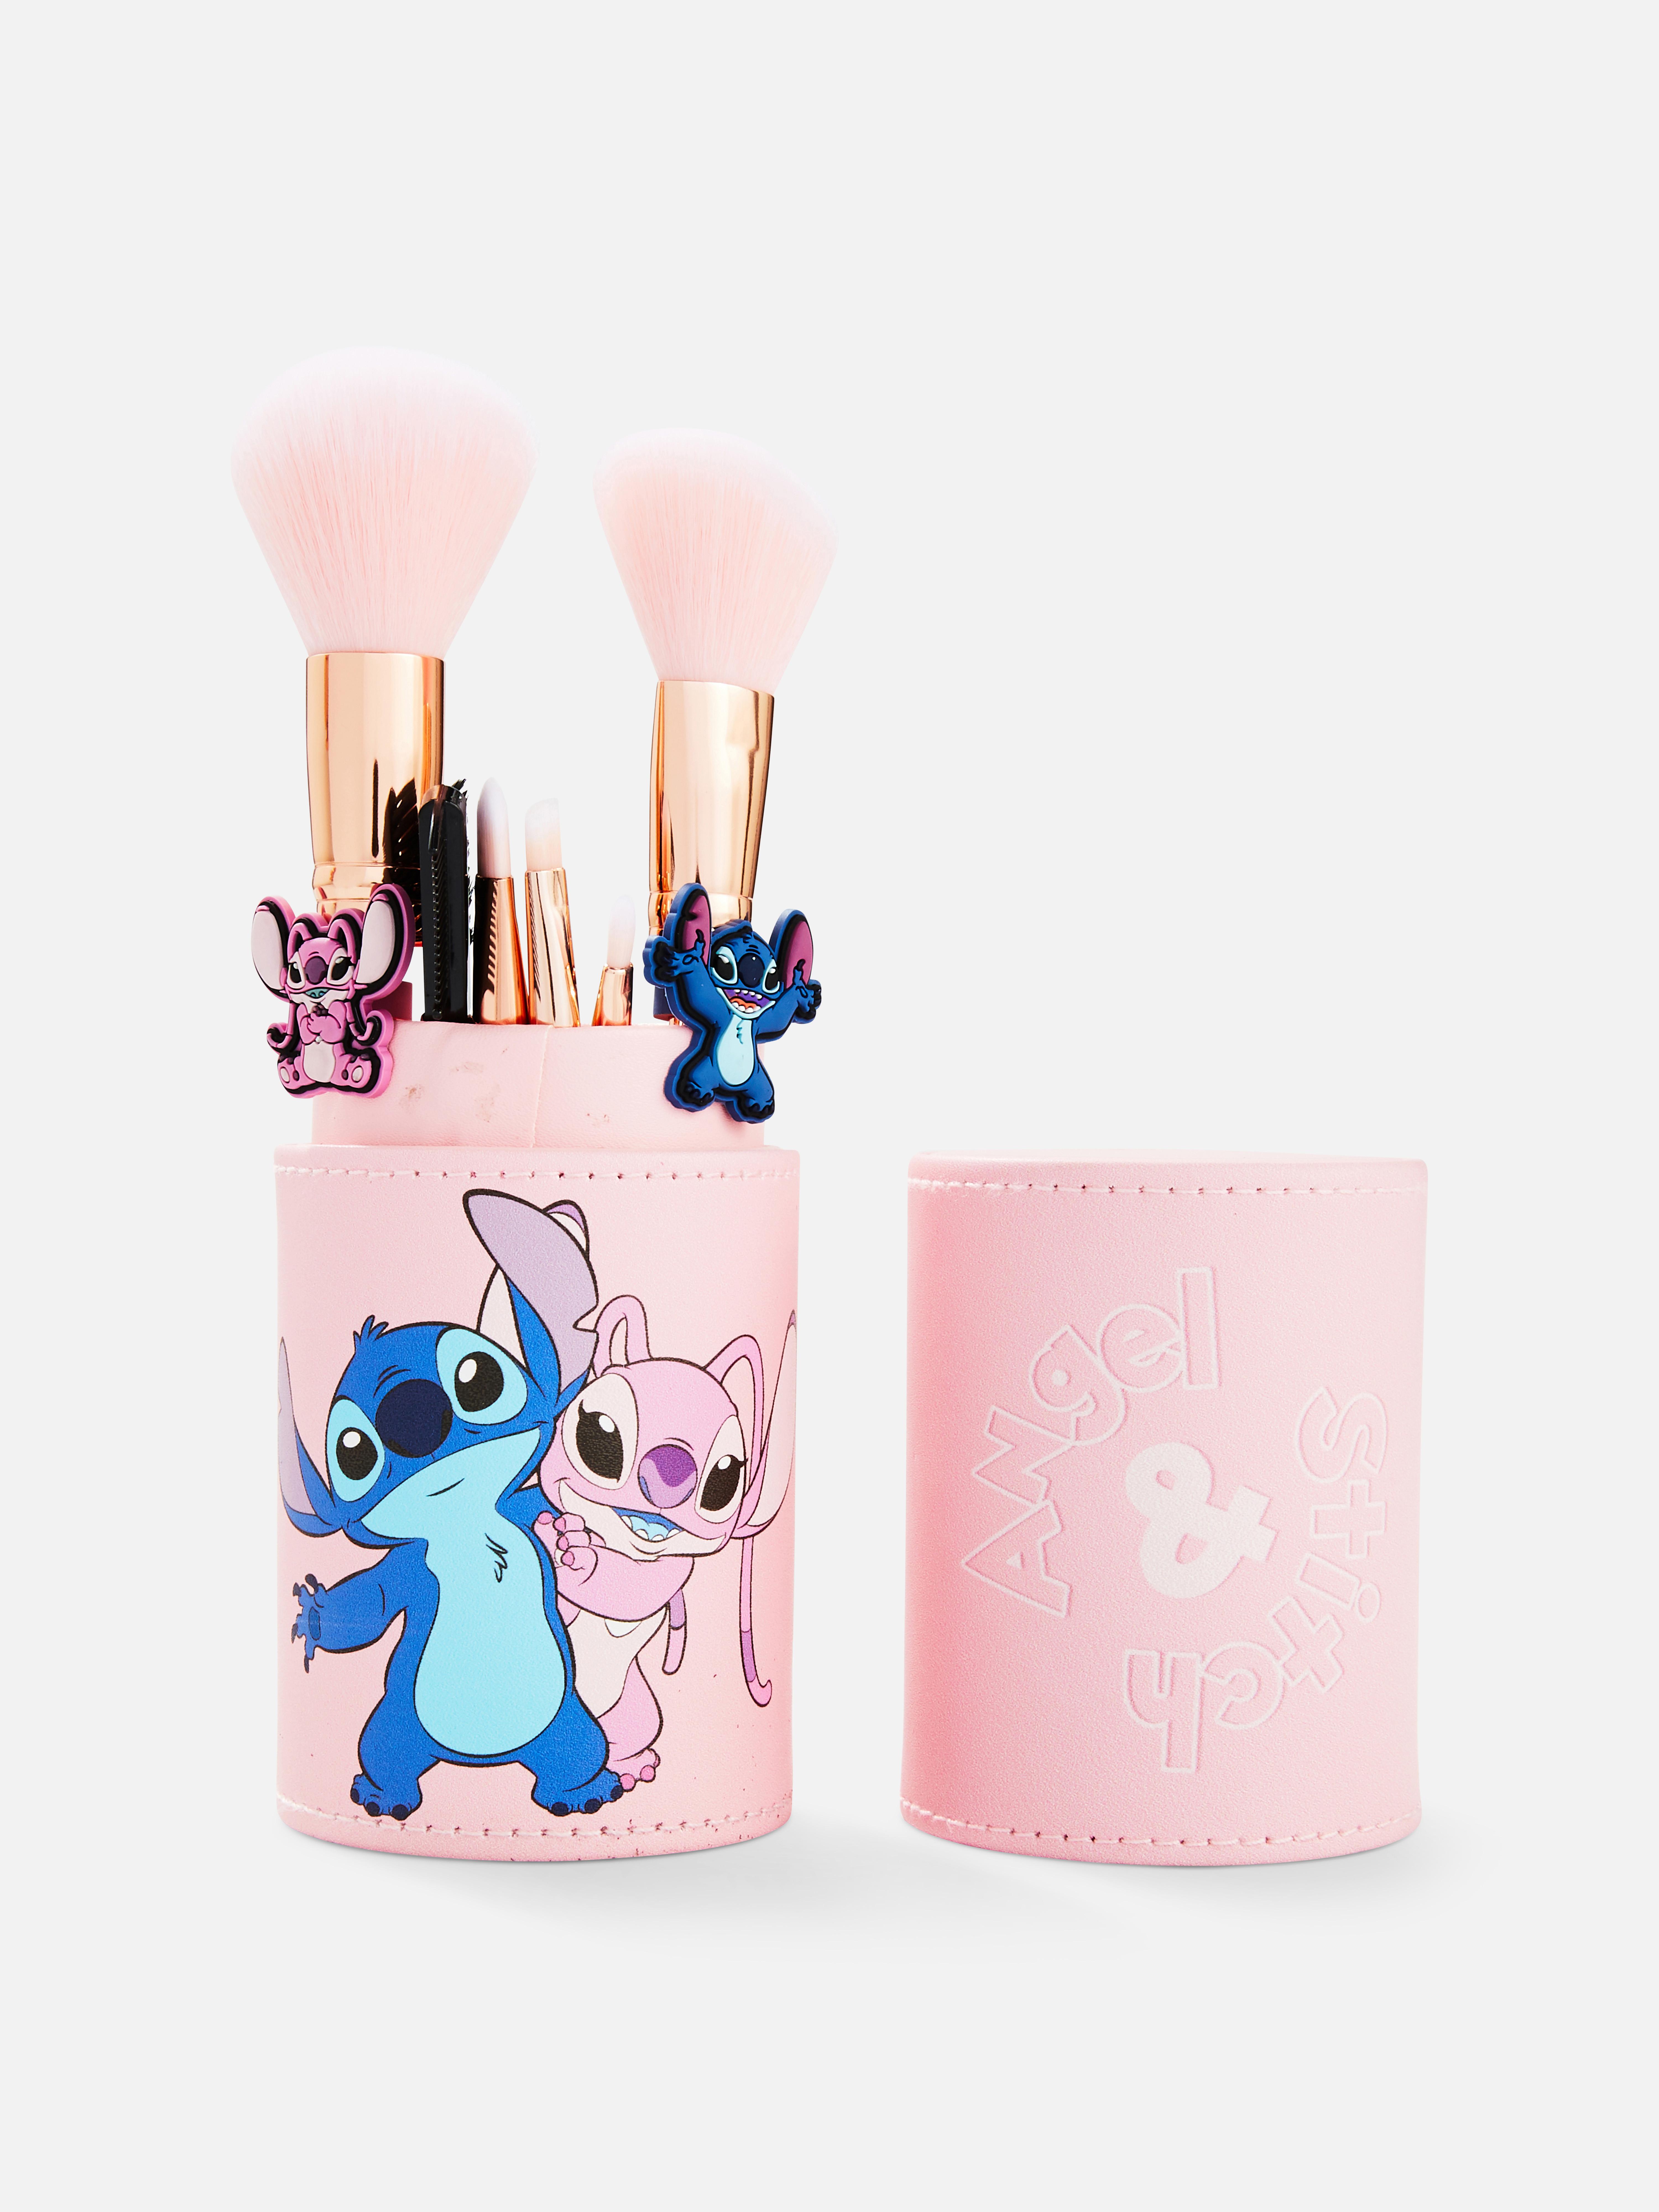 Disney's Lilo & Stitch Makeup Brush and Container Set